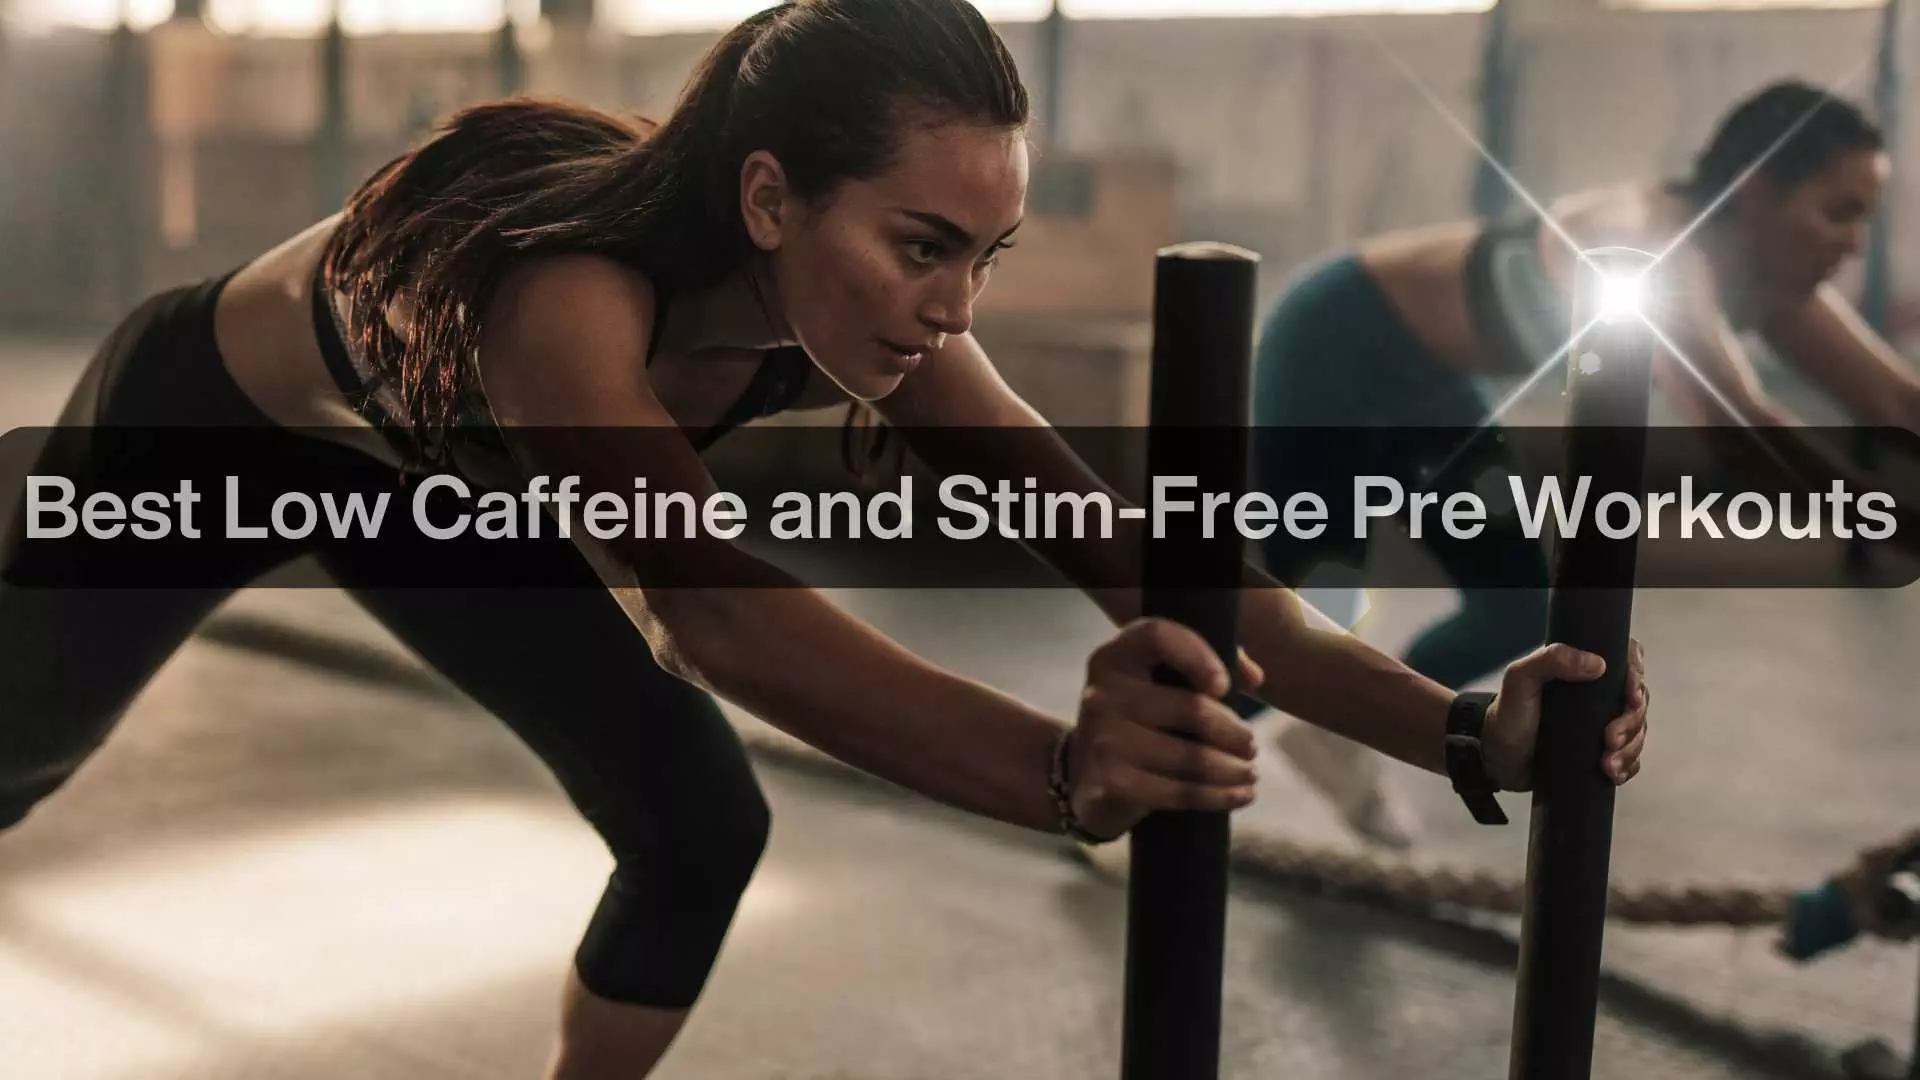 Best low caffeine and stim-free pre-workouts featured image